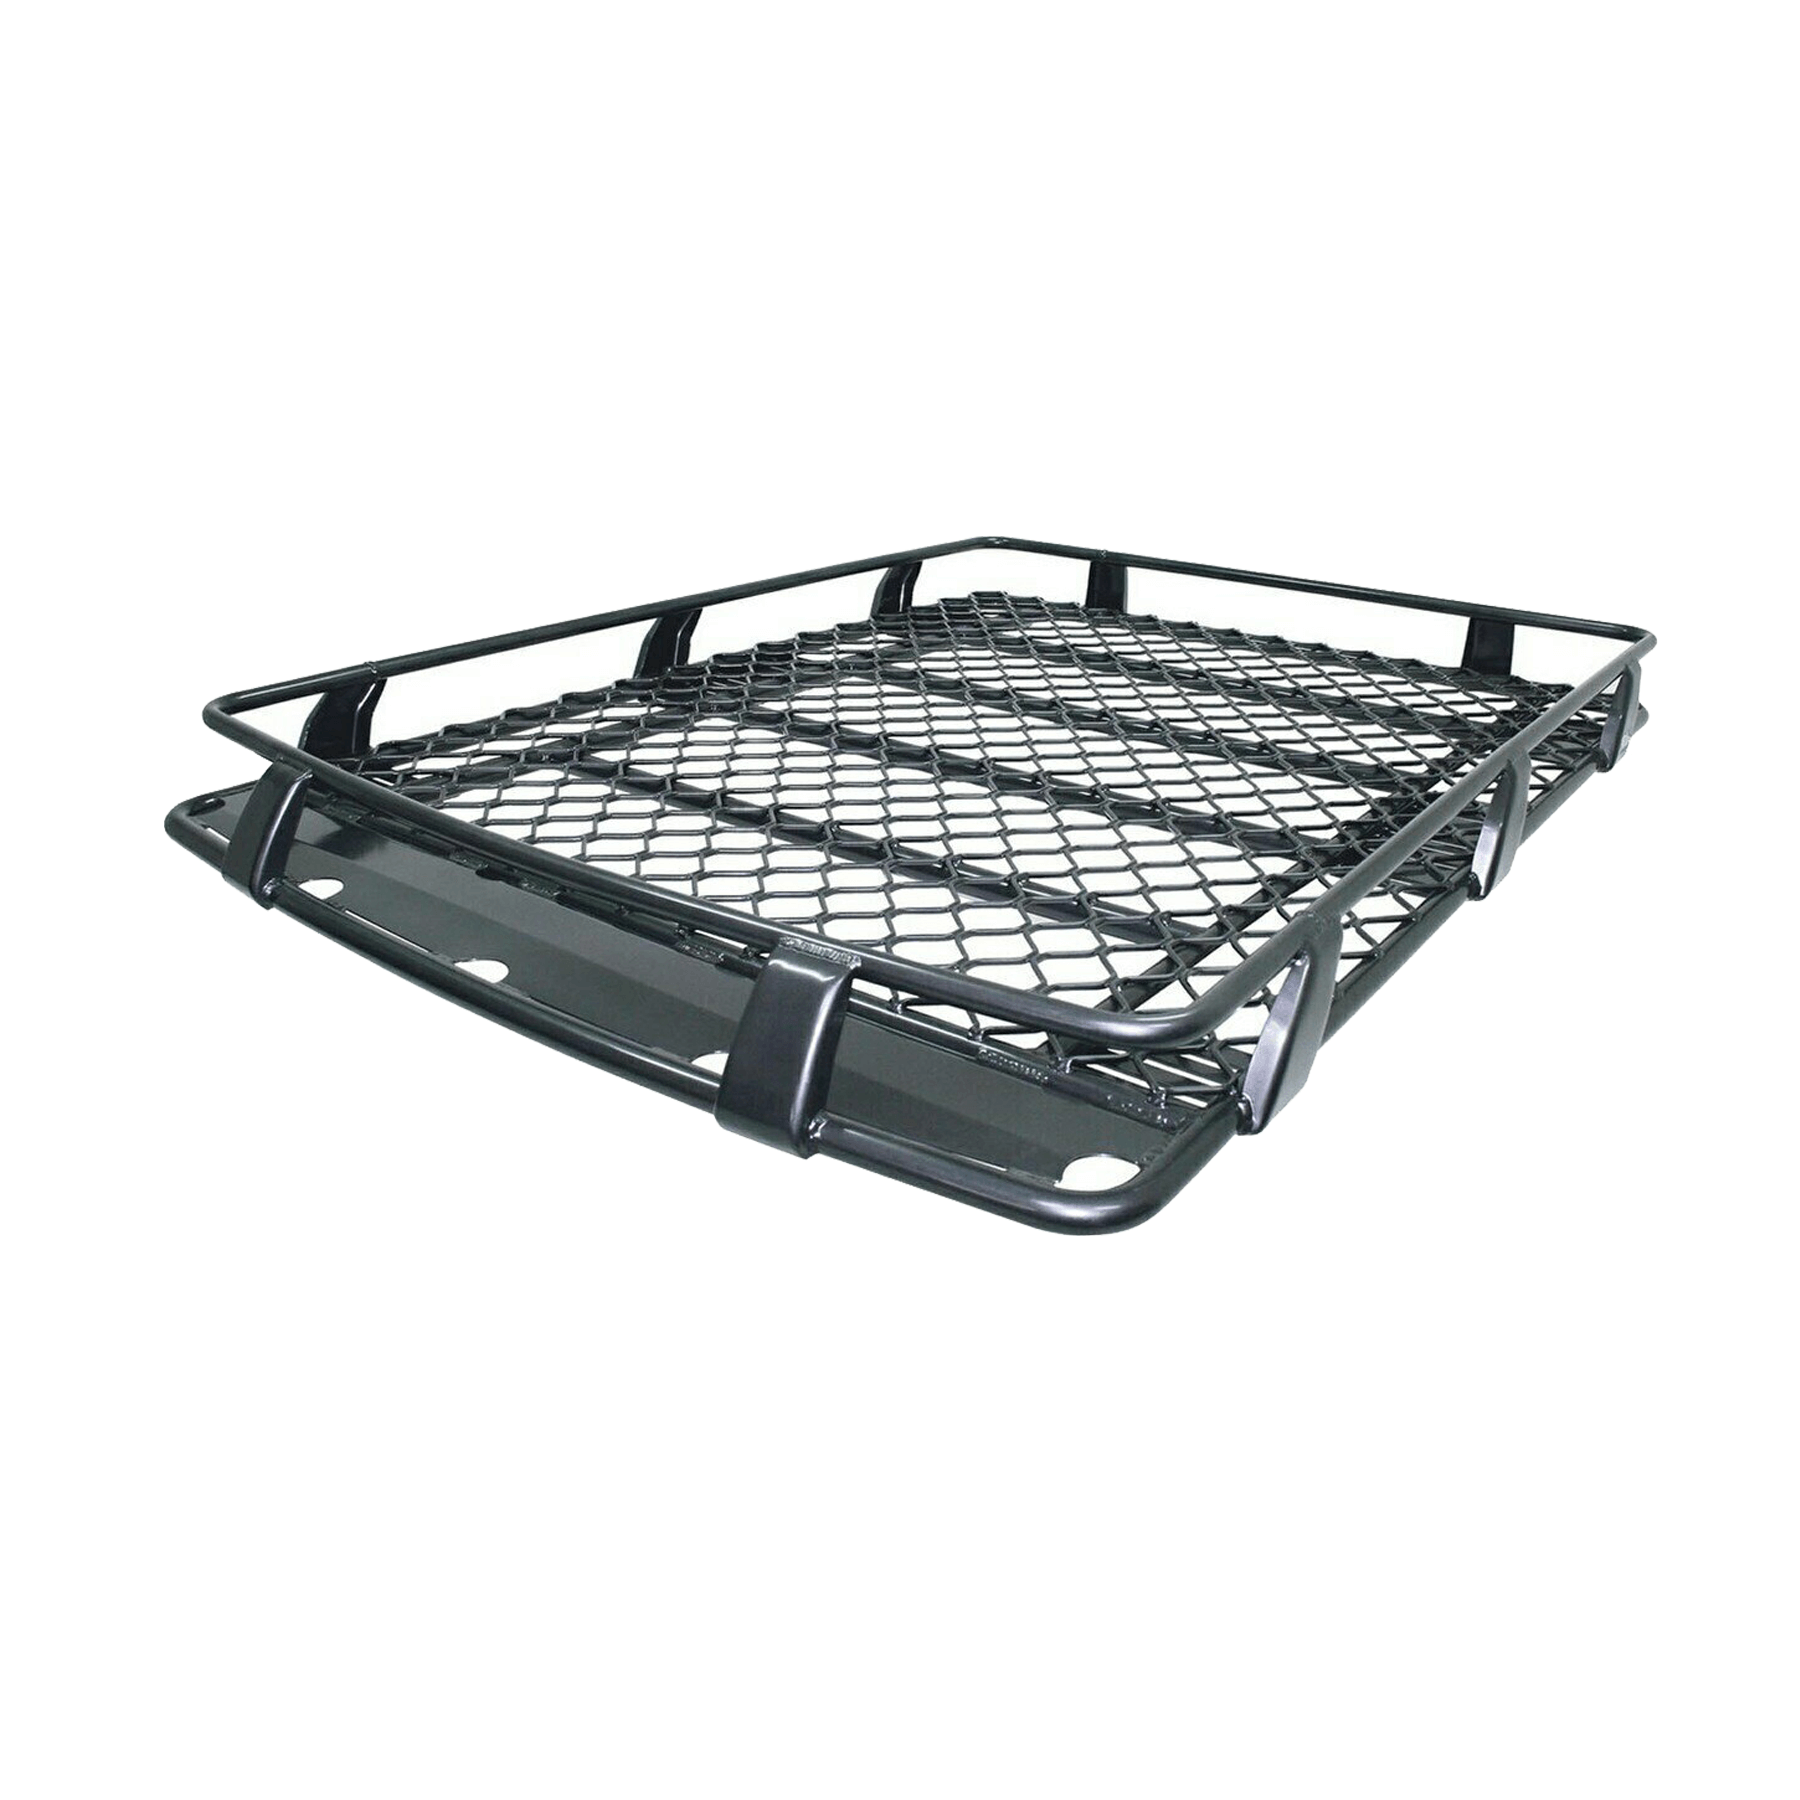 PATROL Y60 GQ 1987 TO 1997 BASKET ALLOY ROOF RACK – 1.4M X 1.25M (OPEN END)